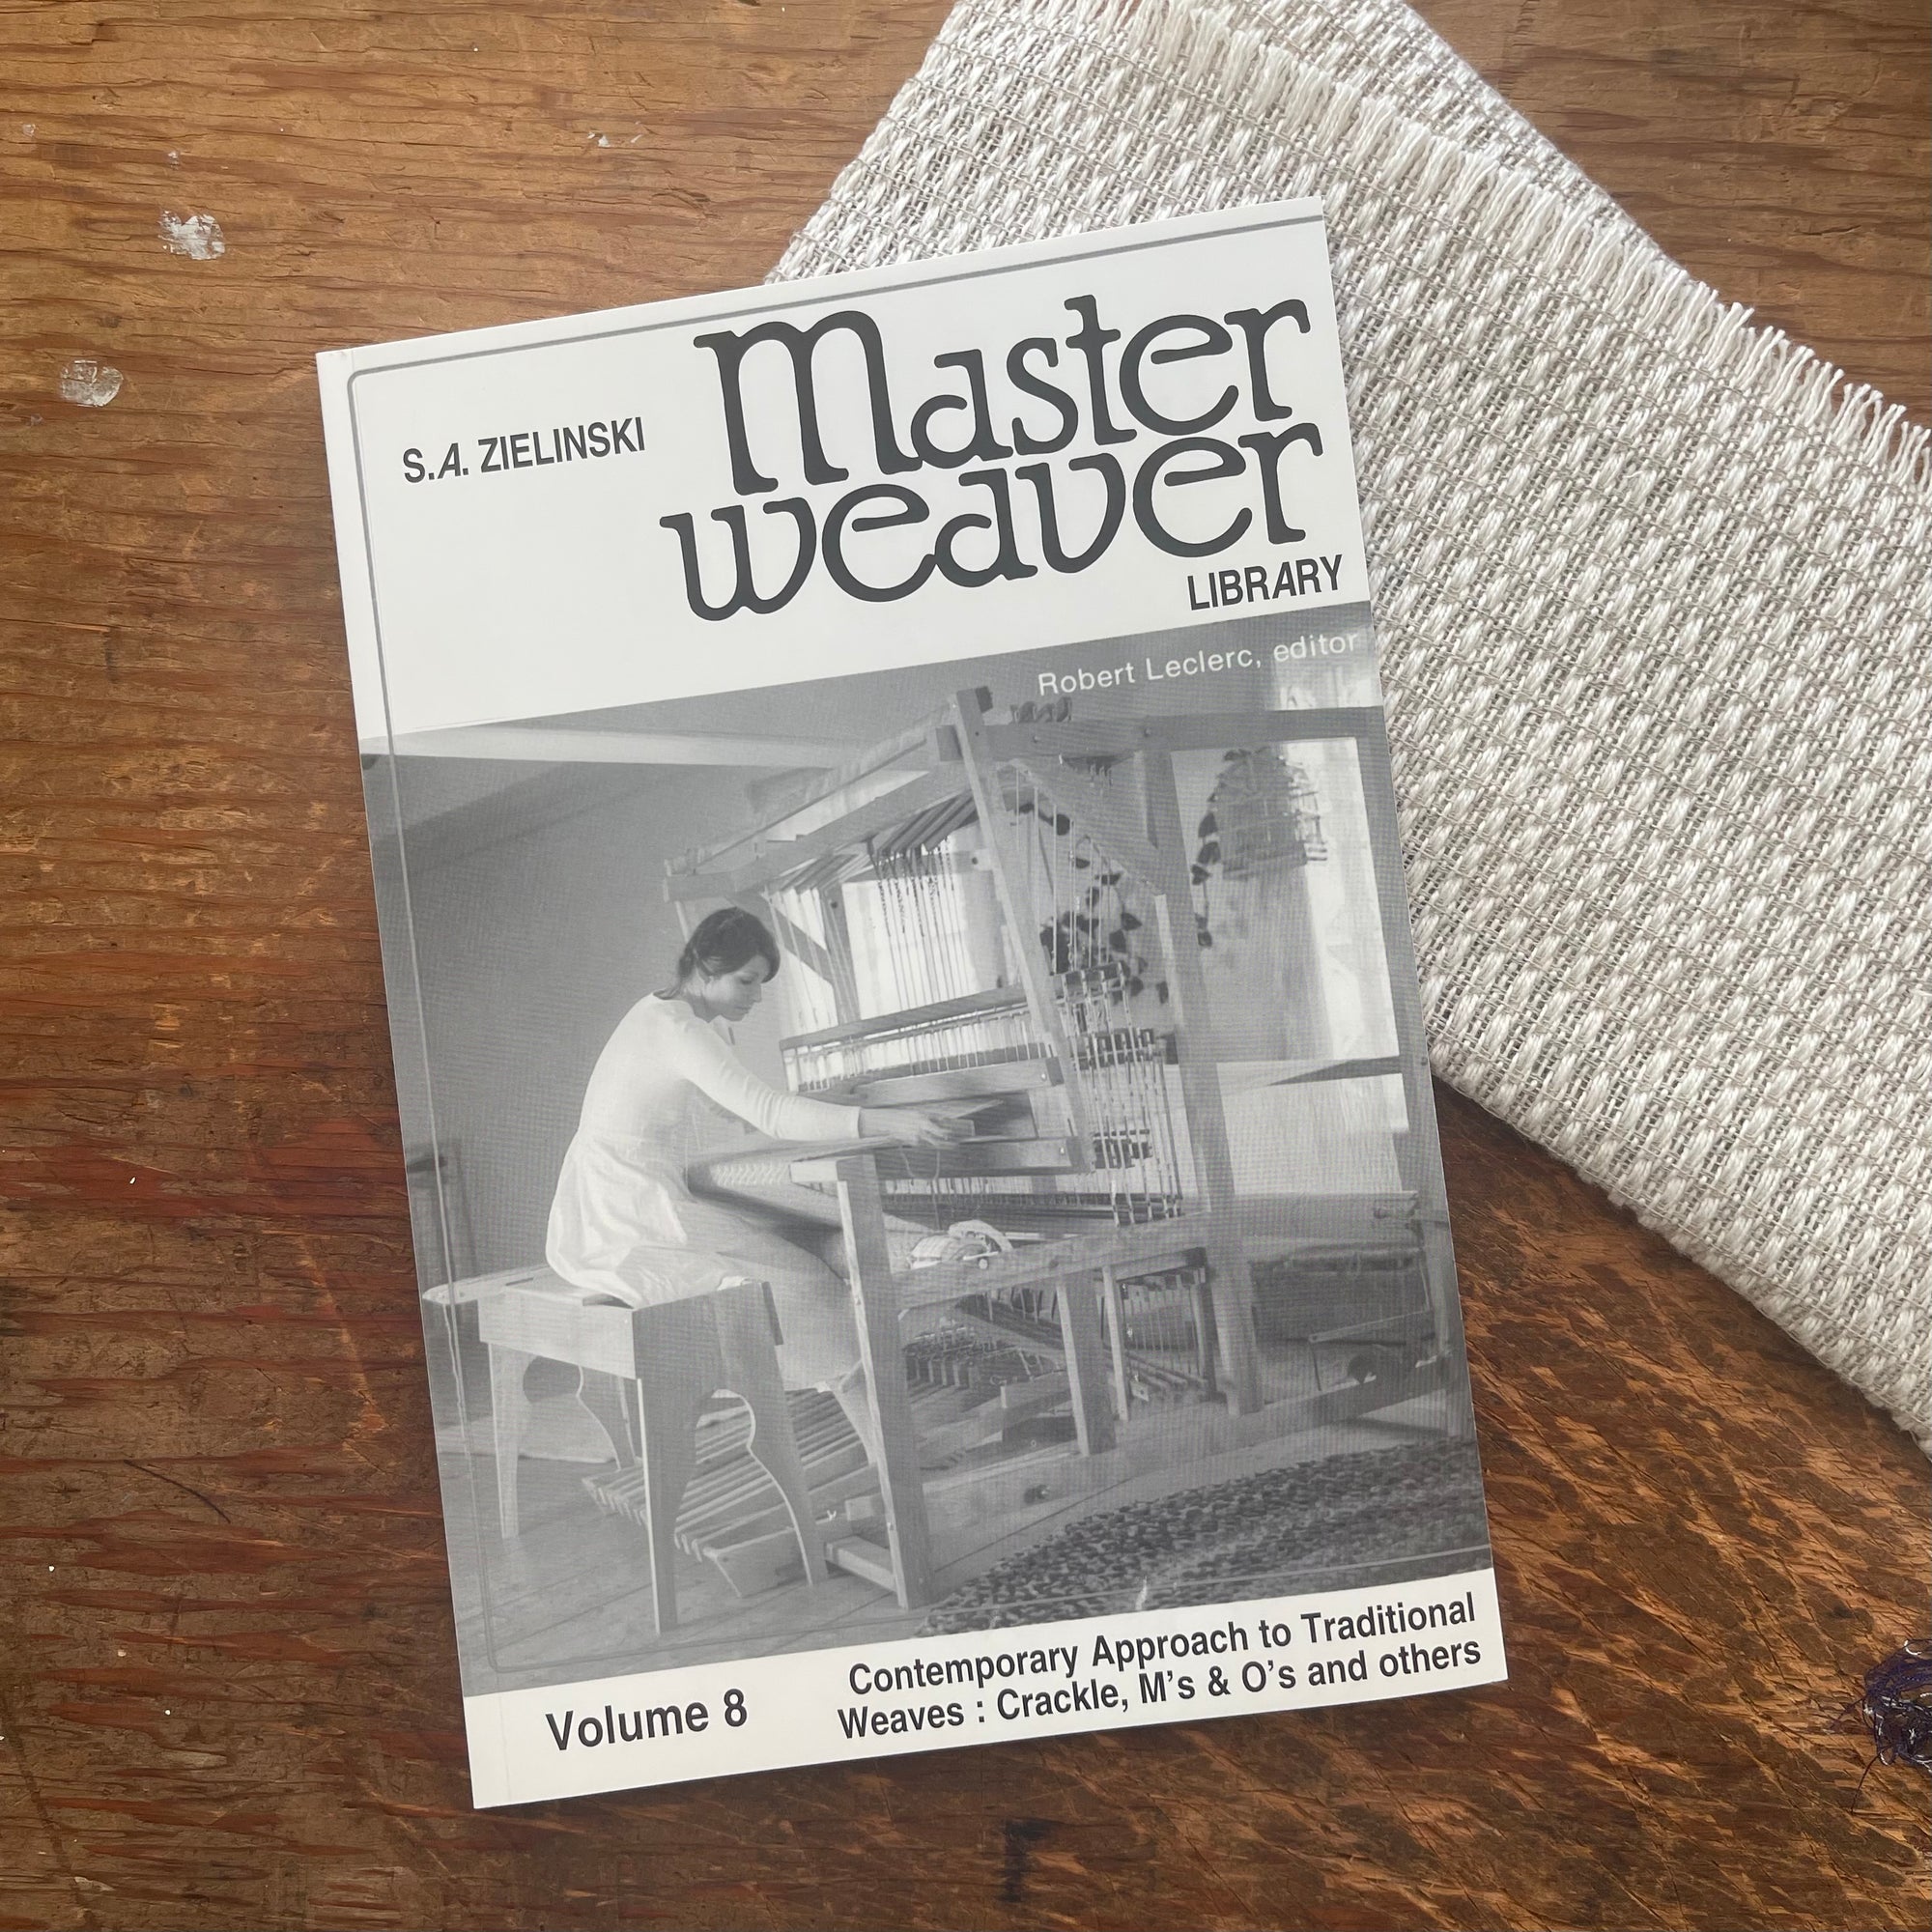 MASTER WEAVER LIBRARY by S. A . ZIELINSKI - Vol. 8 - Contemporary Approach to Traditional Weaves: Crackle,M's & O's and Others